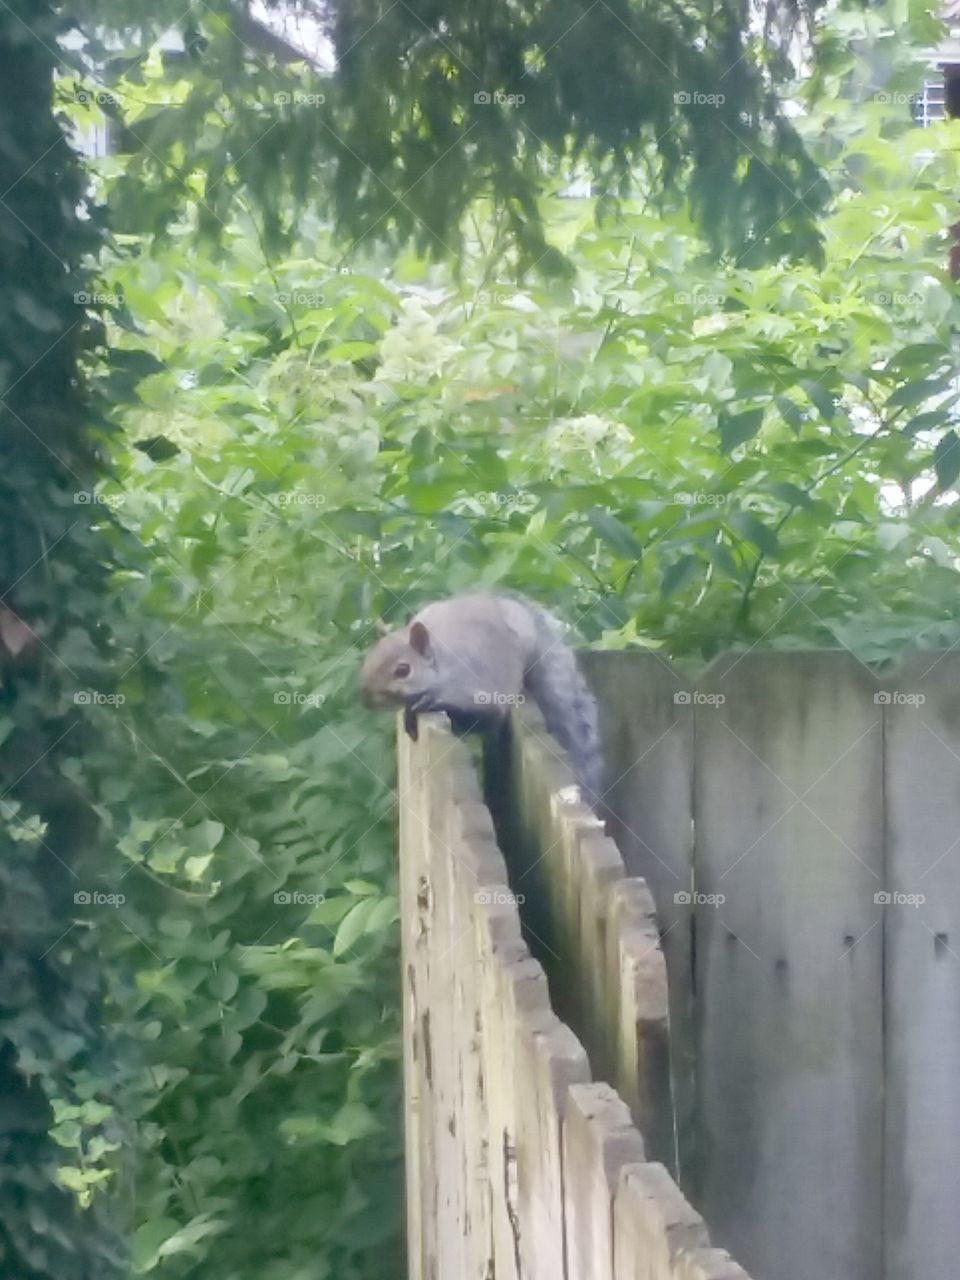 Squirrel eating on the wooden fence  